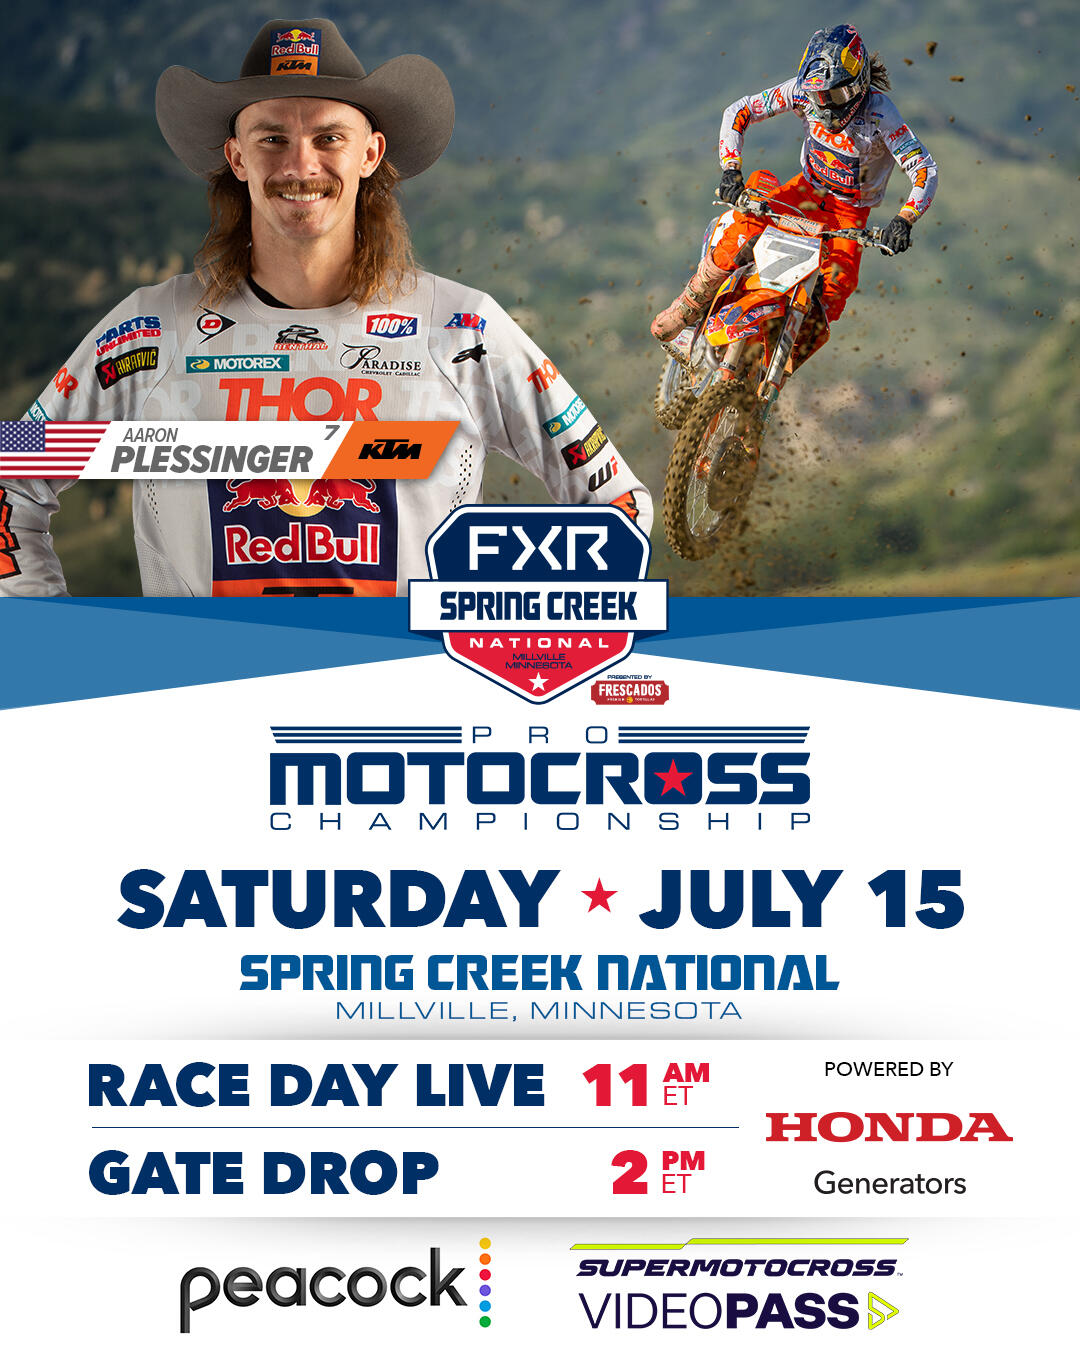 How To Watch FXR Spring Creek National